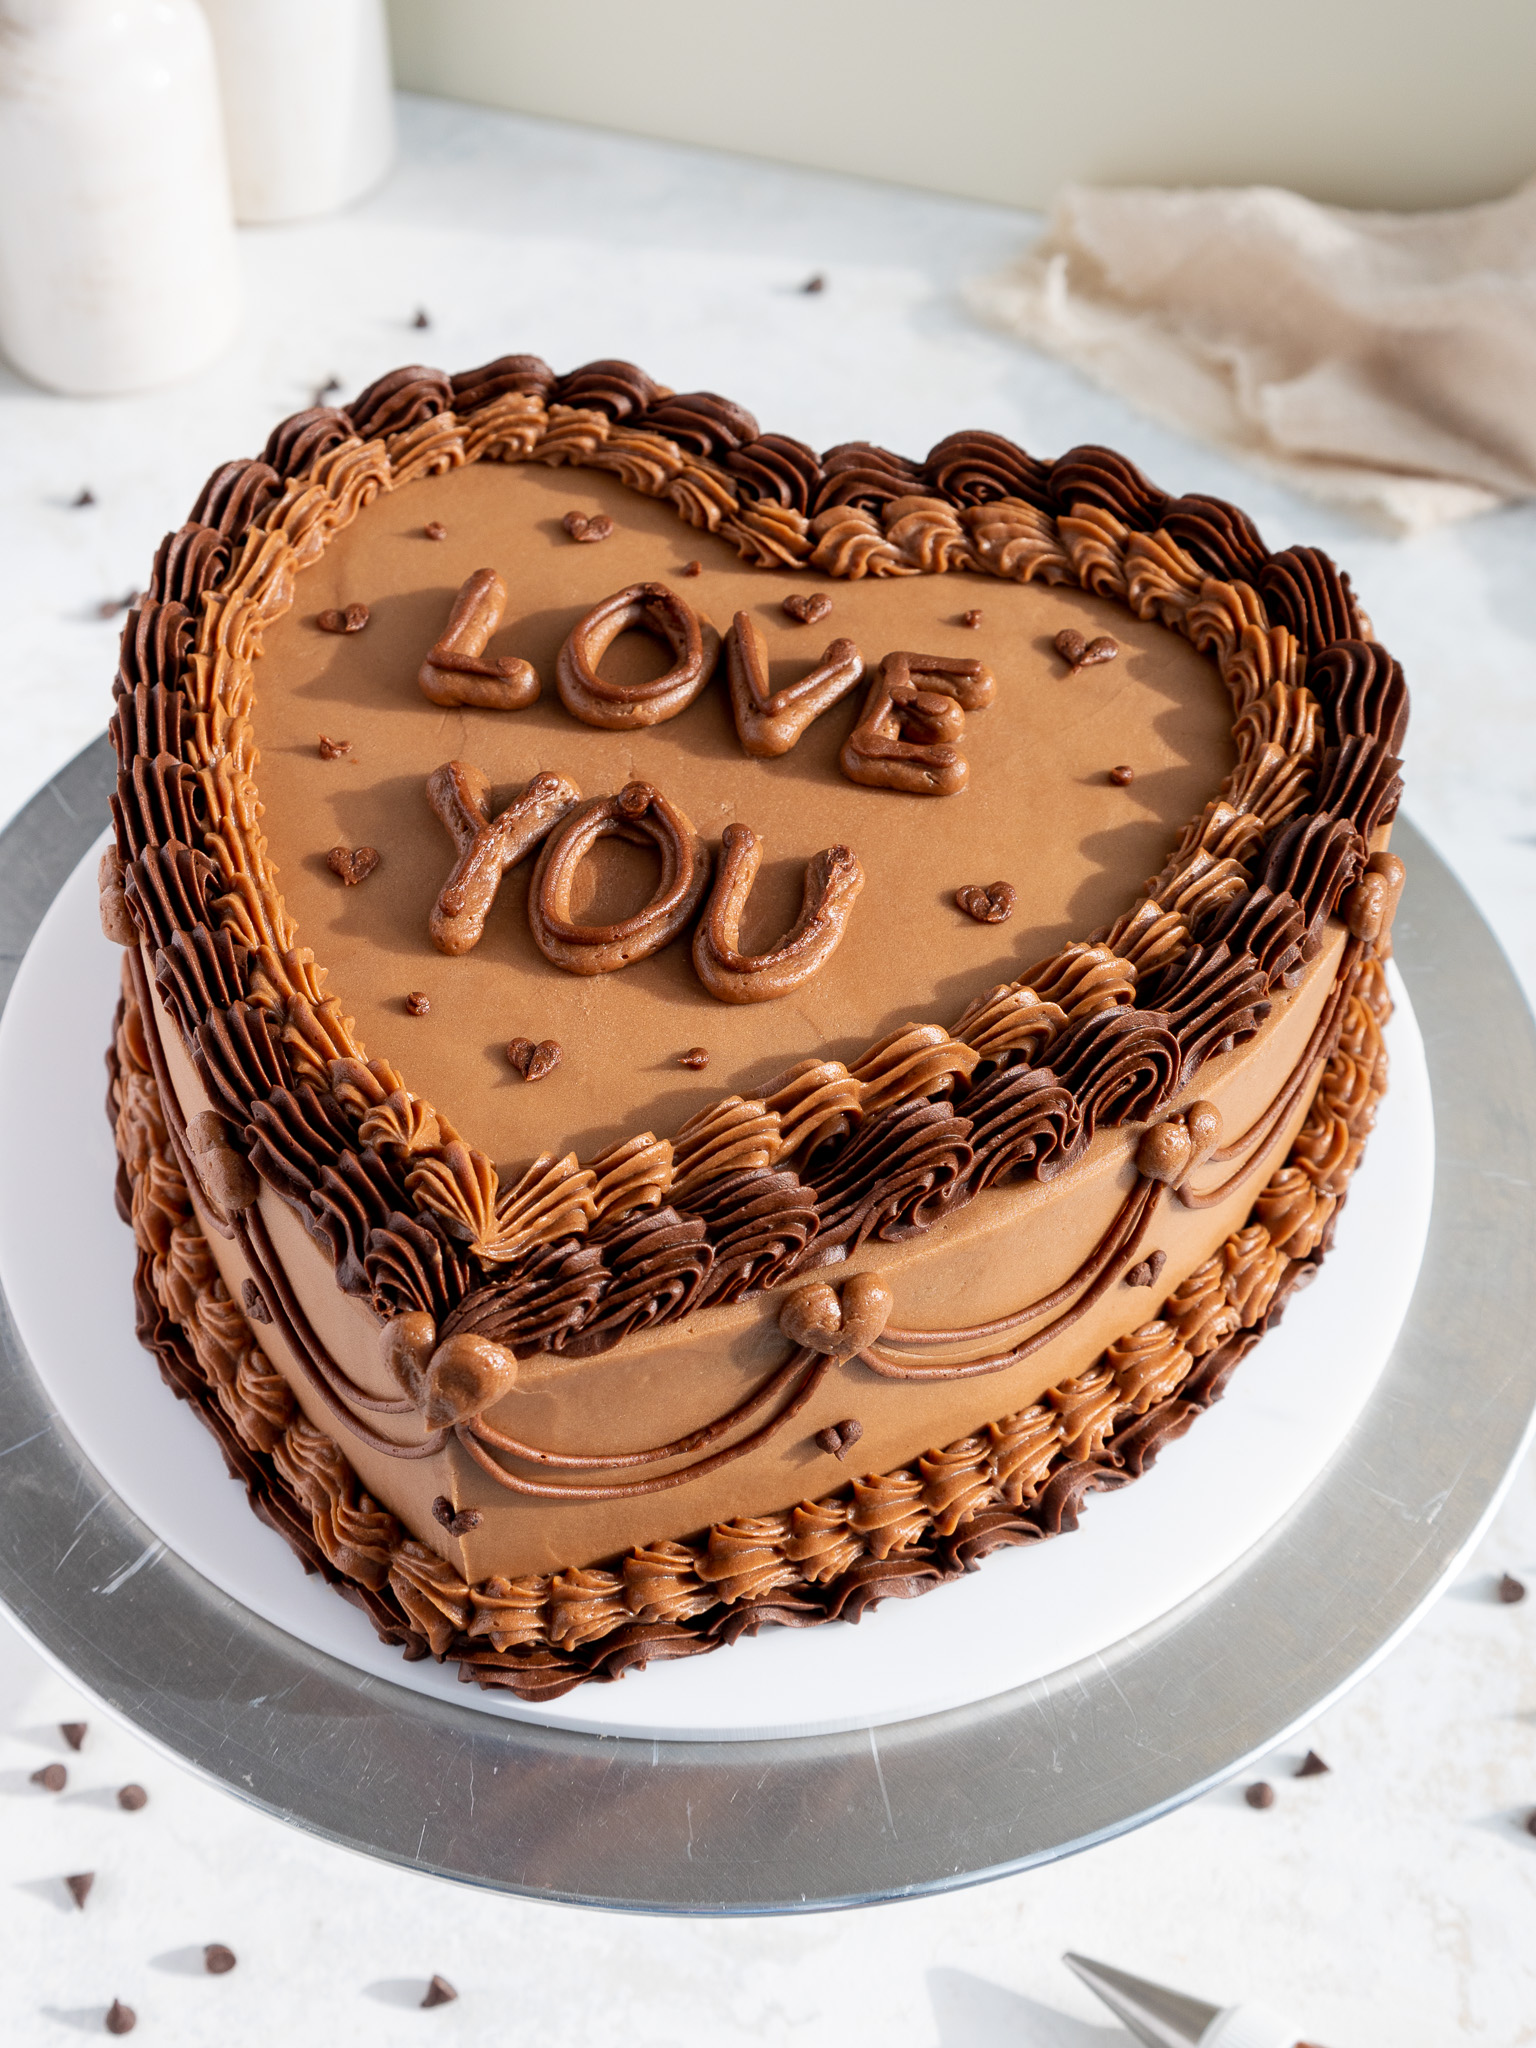 image of a heart shaped chocolate cake that's been decorated with chocolate buttercream in the lambeth style